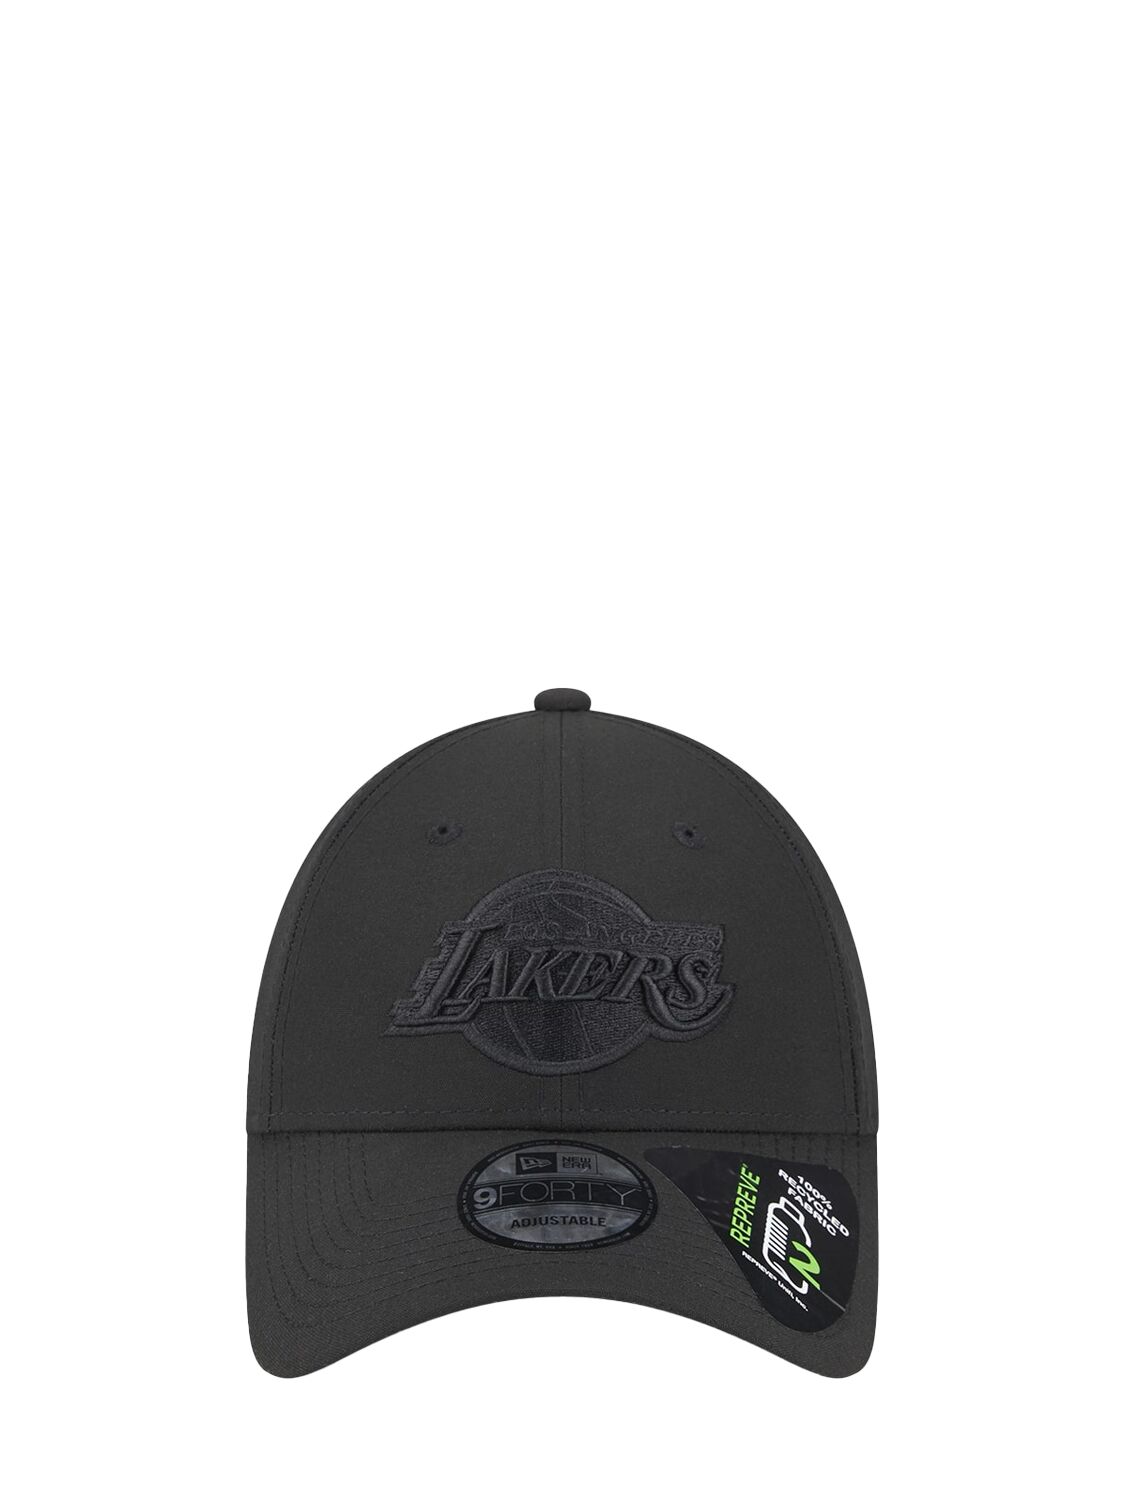 Image of 9forty Reprieve La Lakers Hat